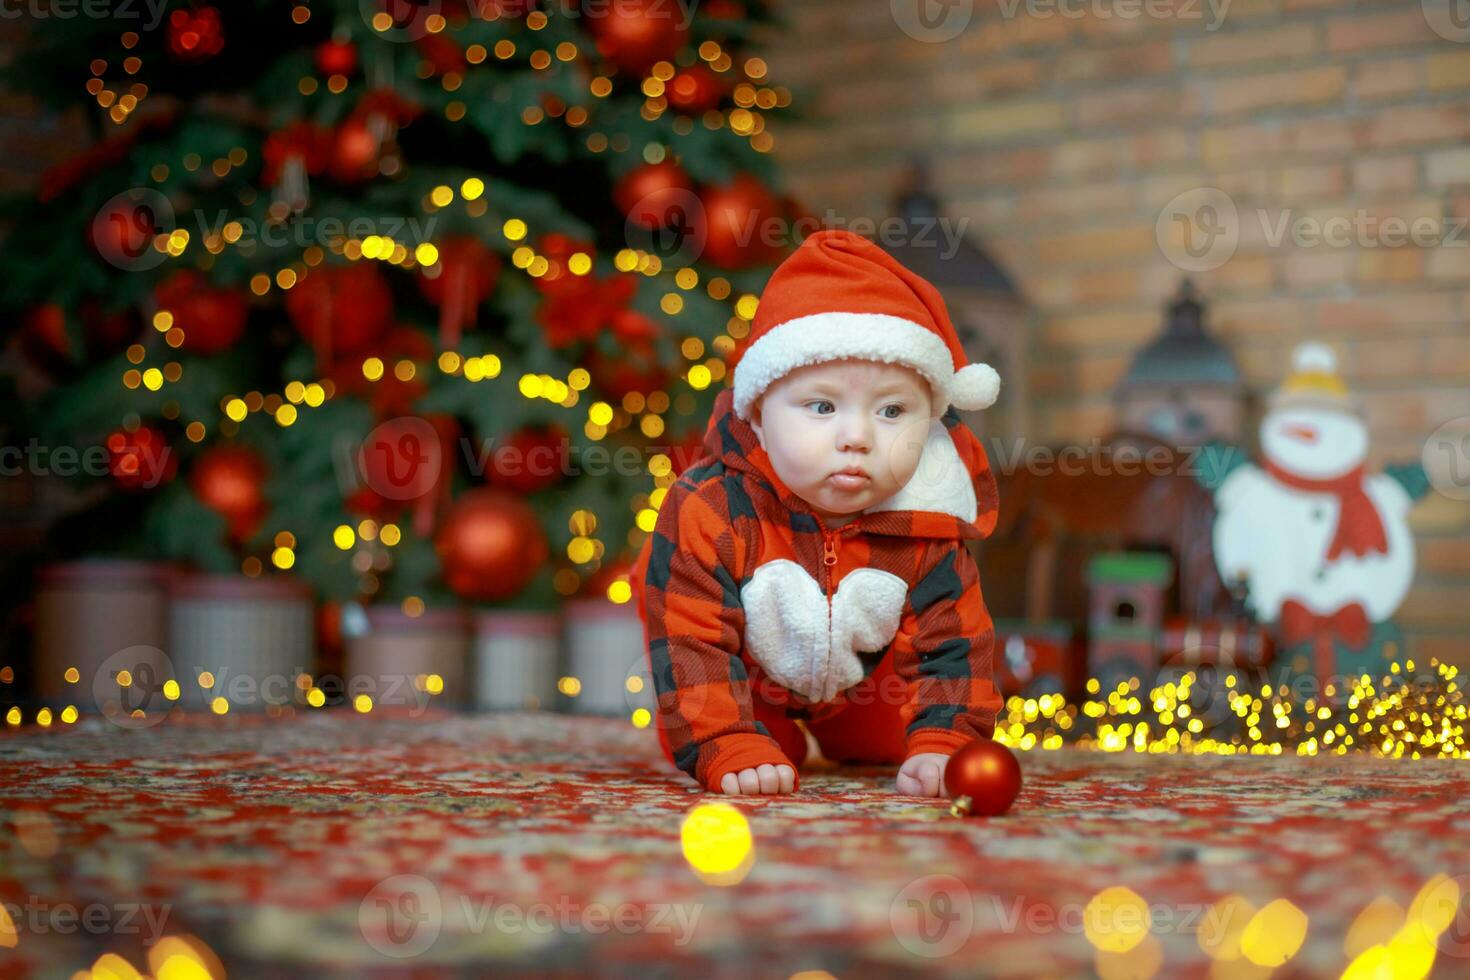 Little happy girl of 6 months creeps near a New Year tree on Christmas Eve. child in Santa Claus costume near luminous garlands. Happy new year 2020 concept photo